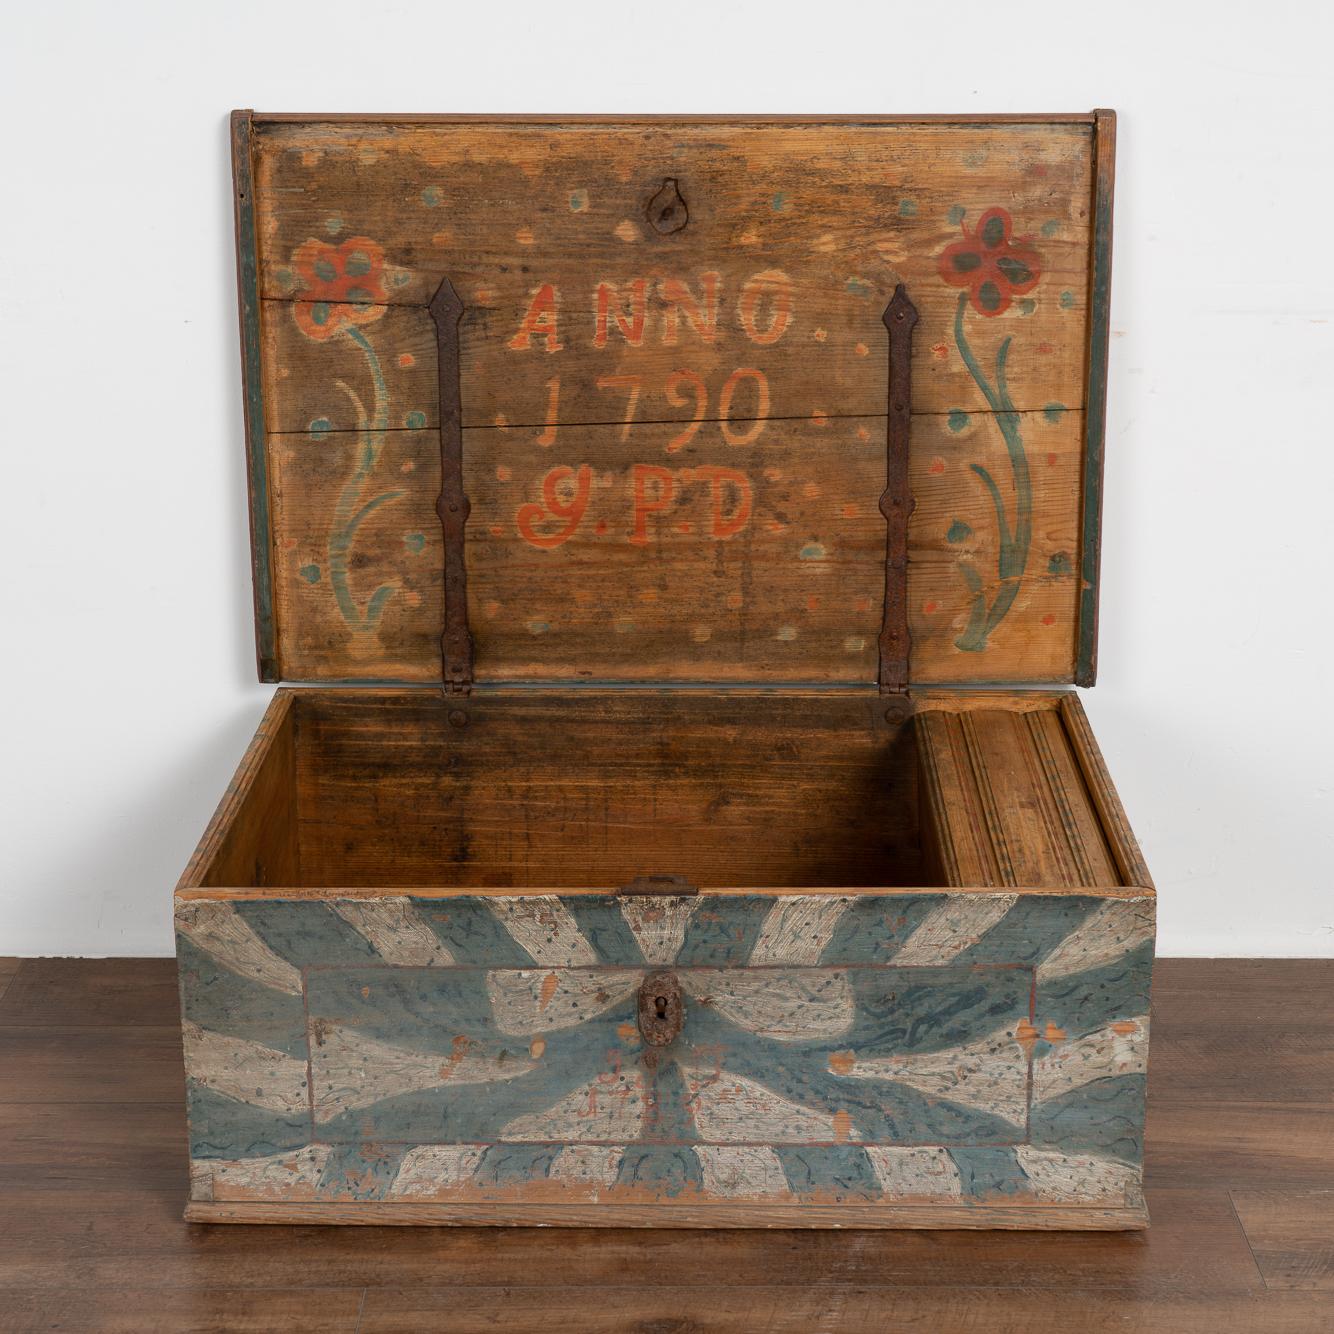 Swedish Original Blue and White Painted Flat Top Trunk, Sweden, Dated 1790